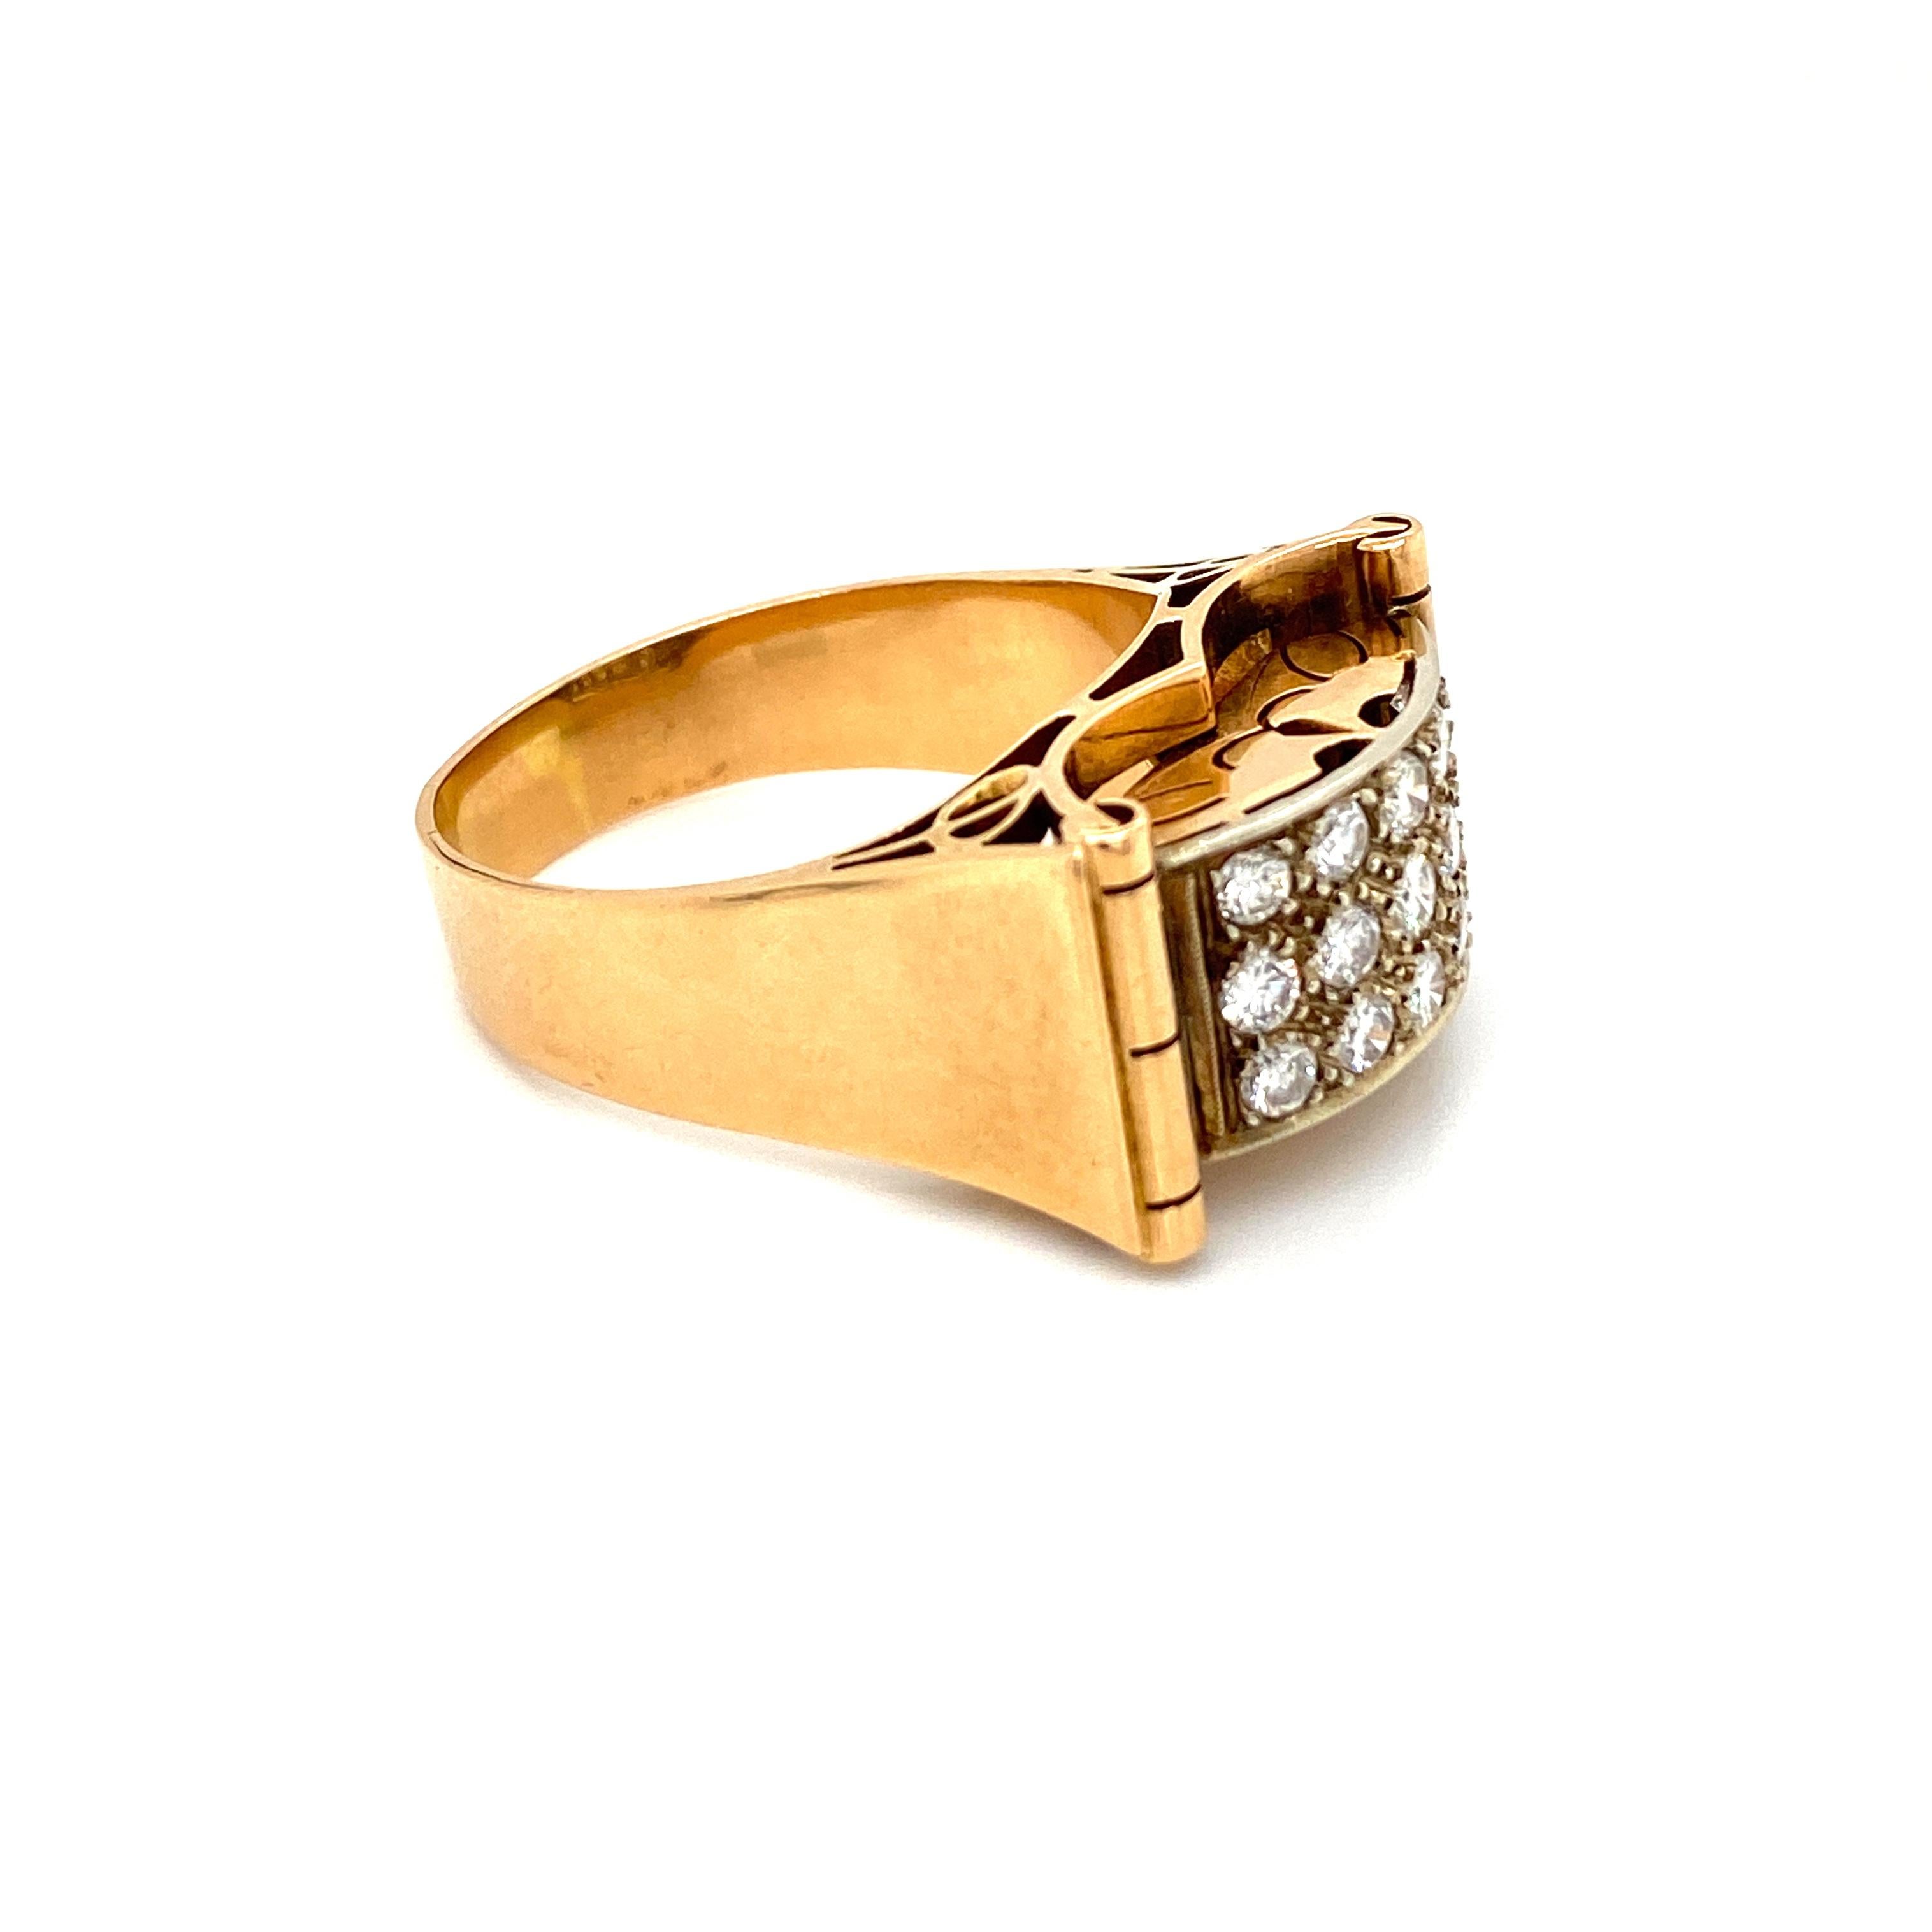 Art Deco 1.50 Carat Diamond Gold Band Ring In Excellent Condition For Sale In Napoli, Italy